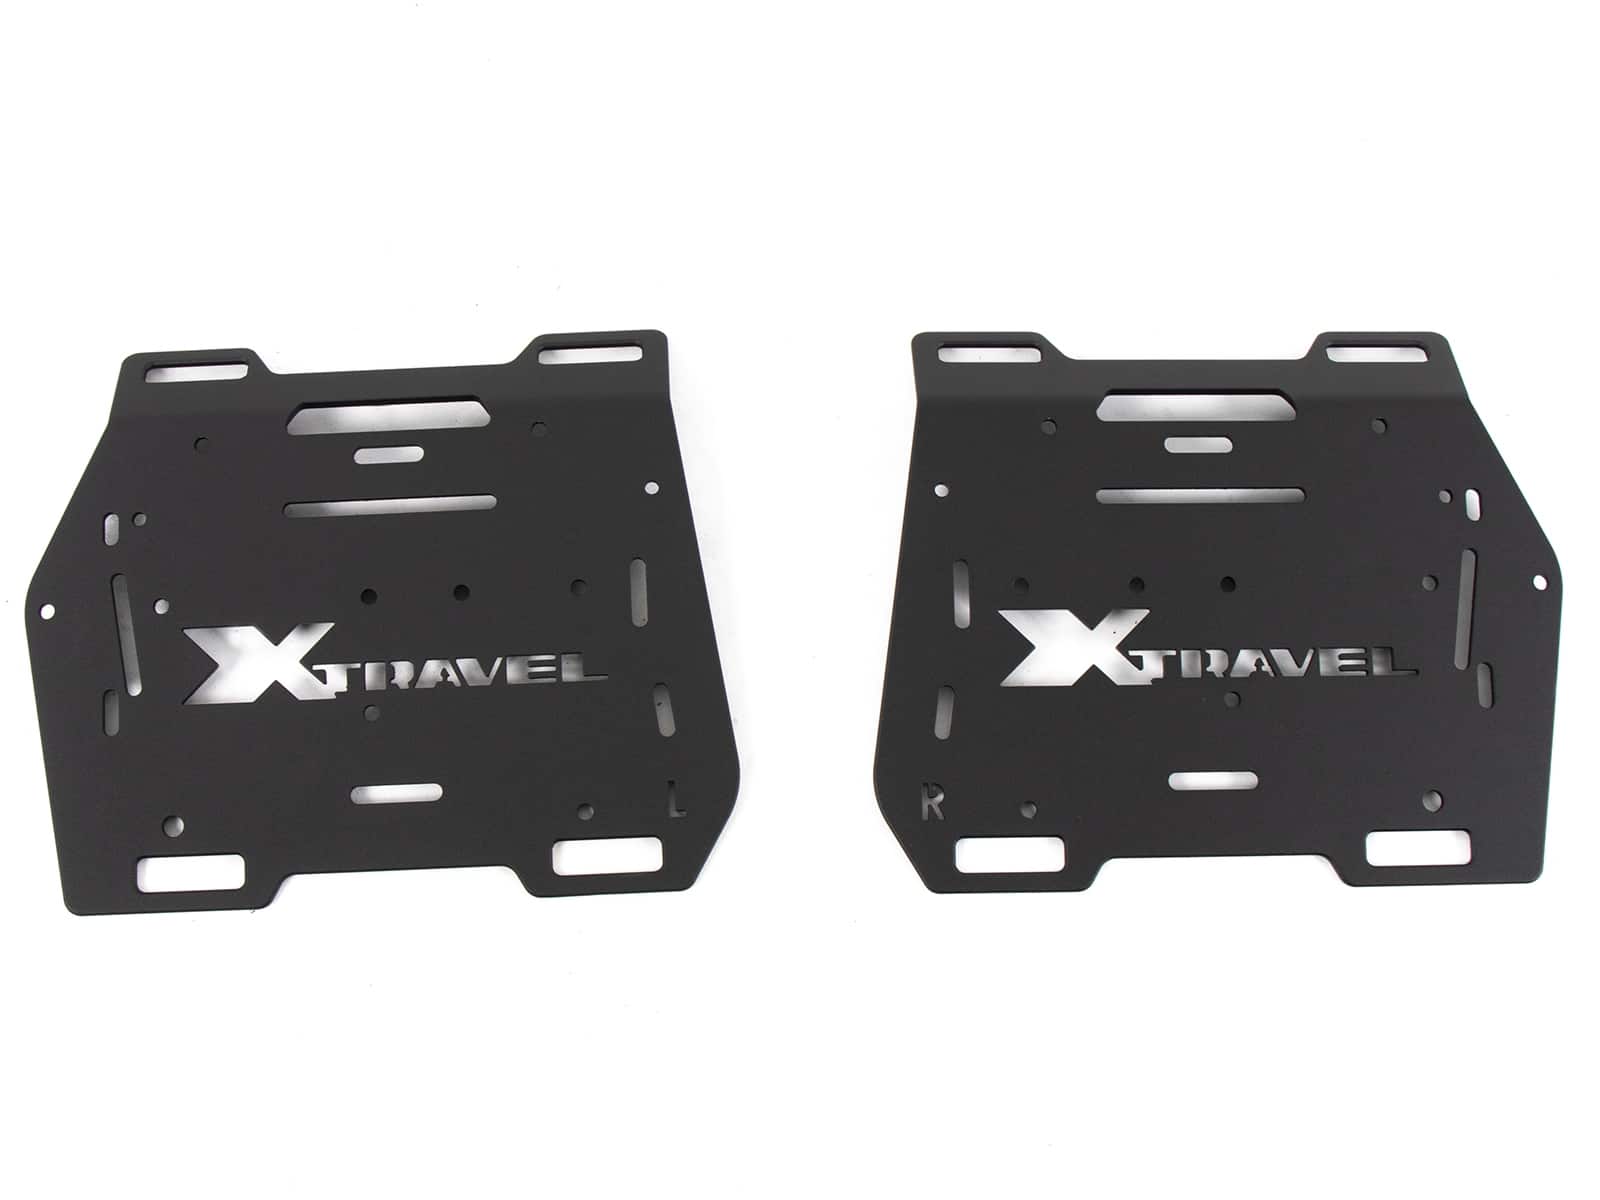 Sidebags Xtravel Basic incl. 2x universal holding plates for side carrier